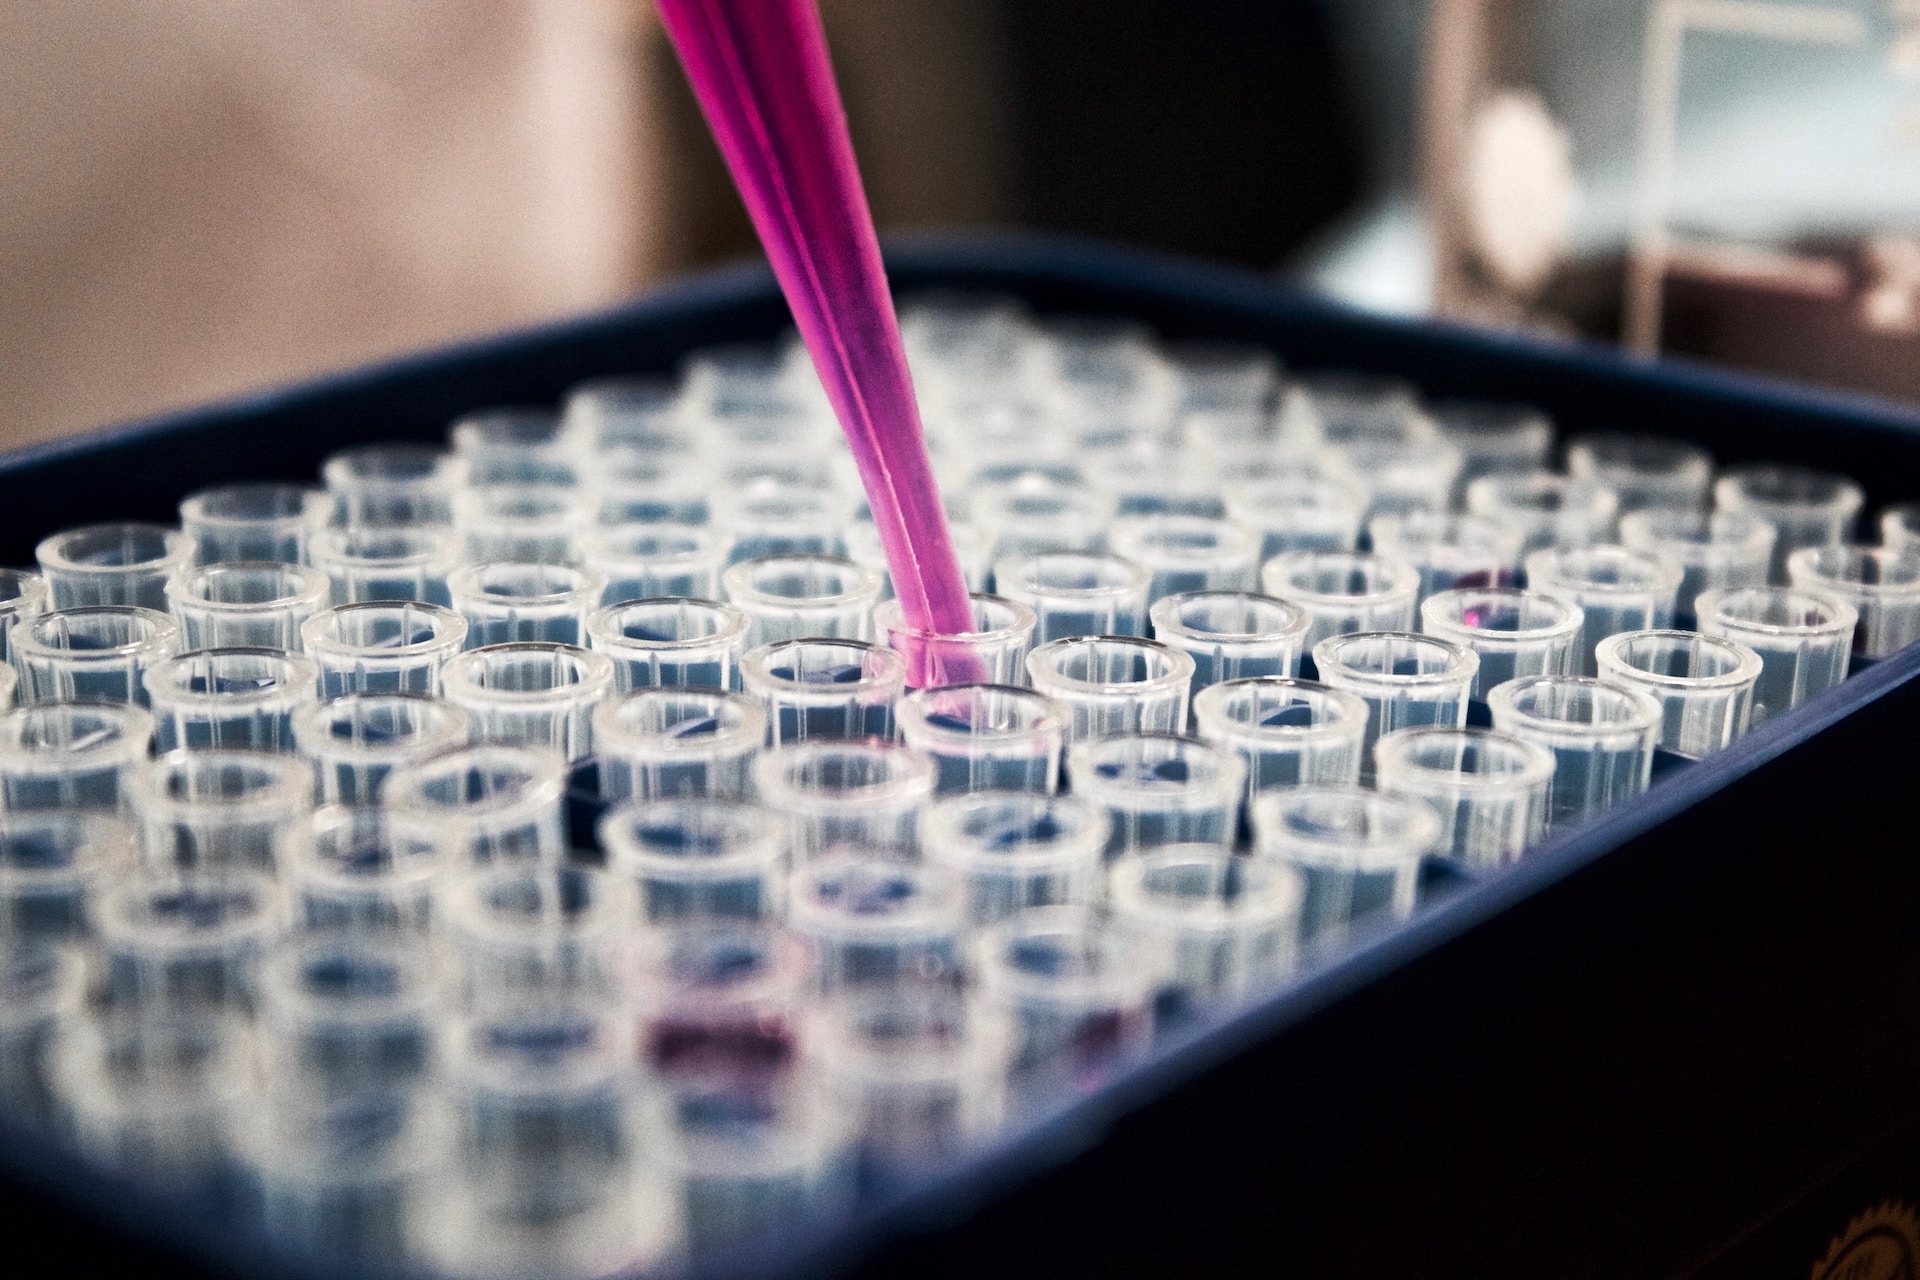 A person is conducting a feasibility study by pouring a pink liquid into a test tube for market research purposes.